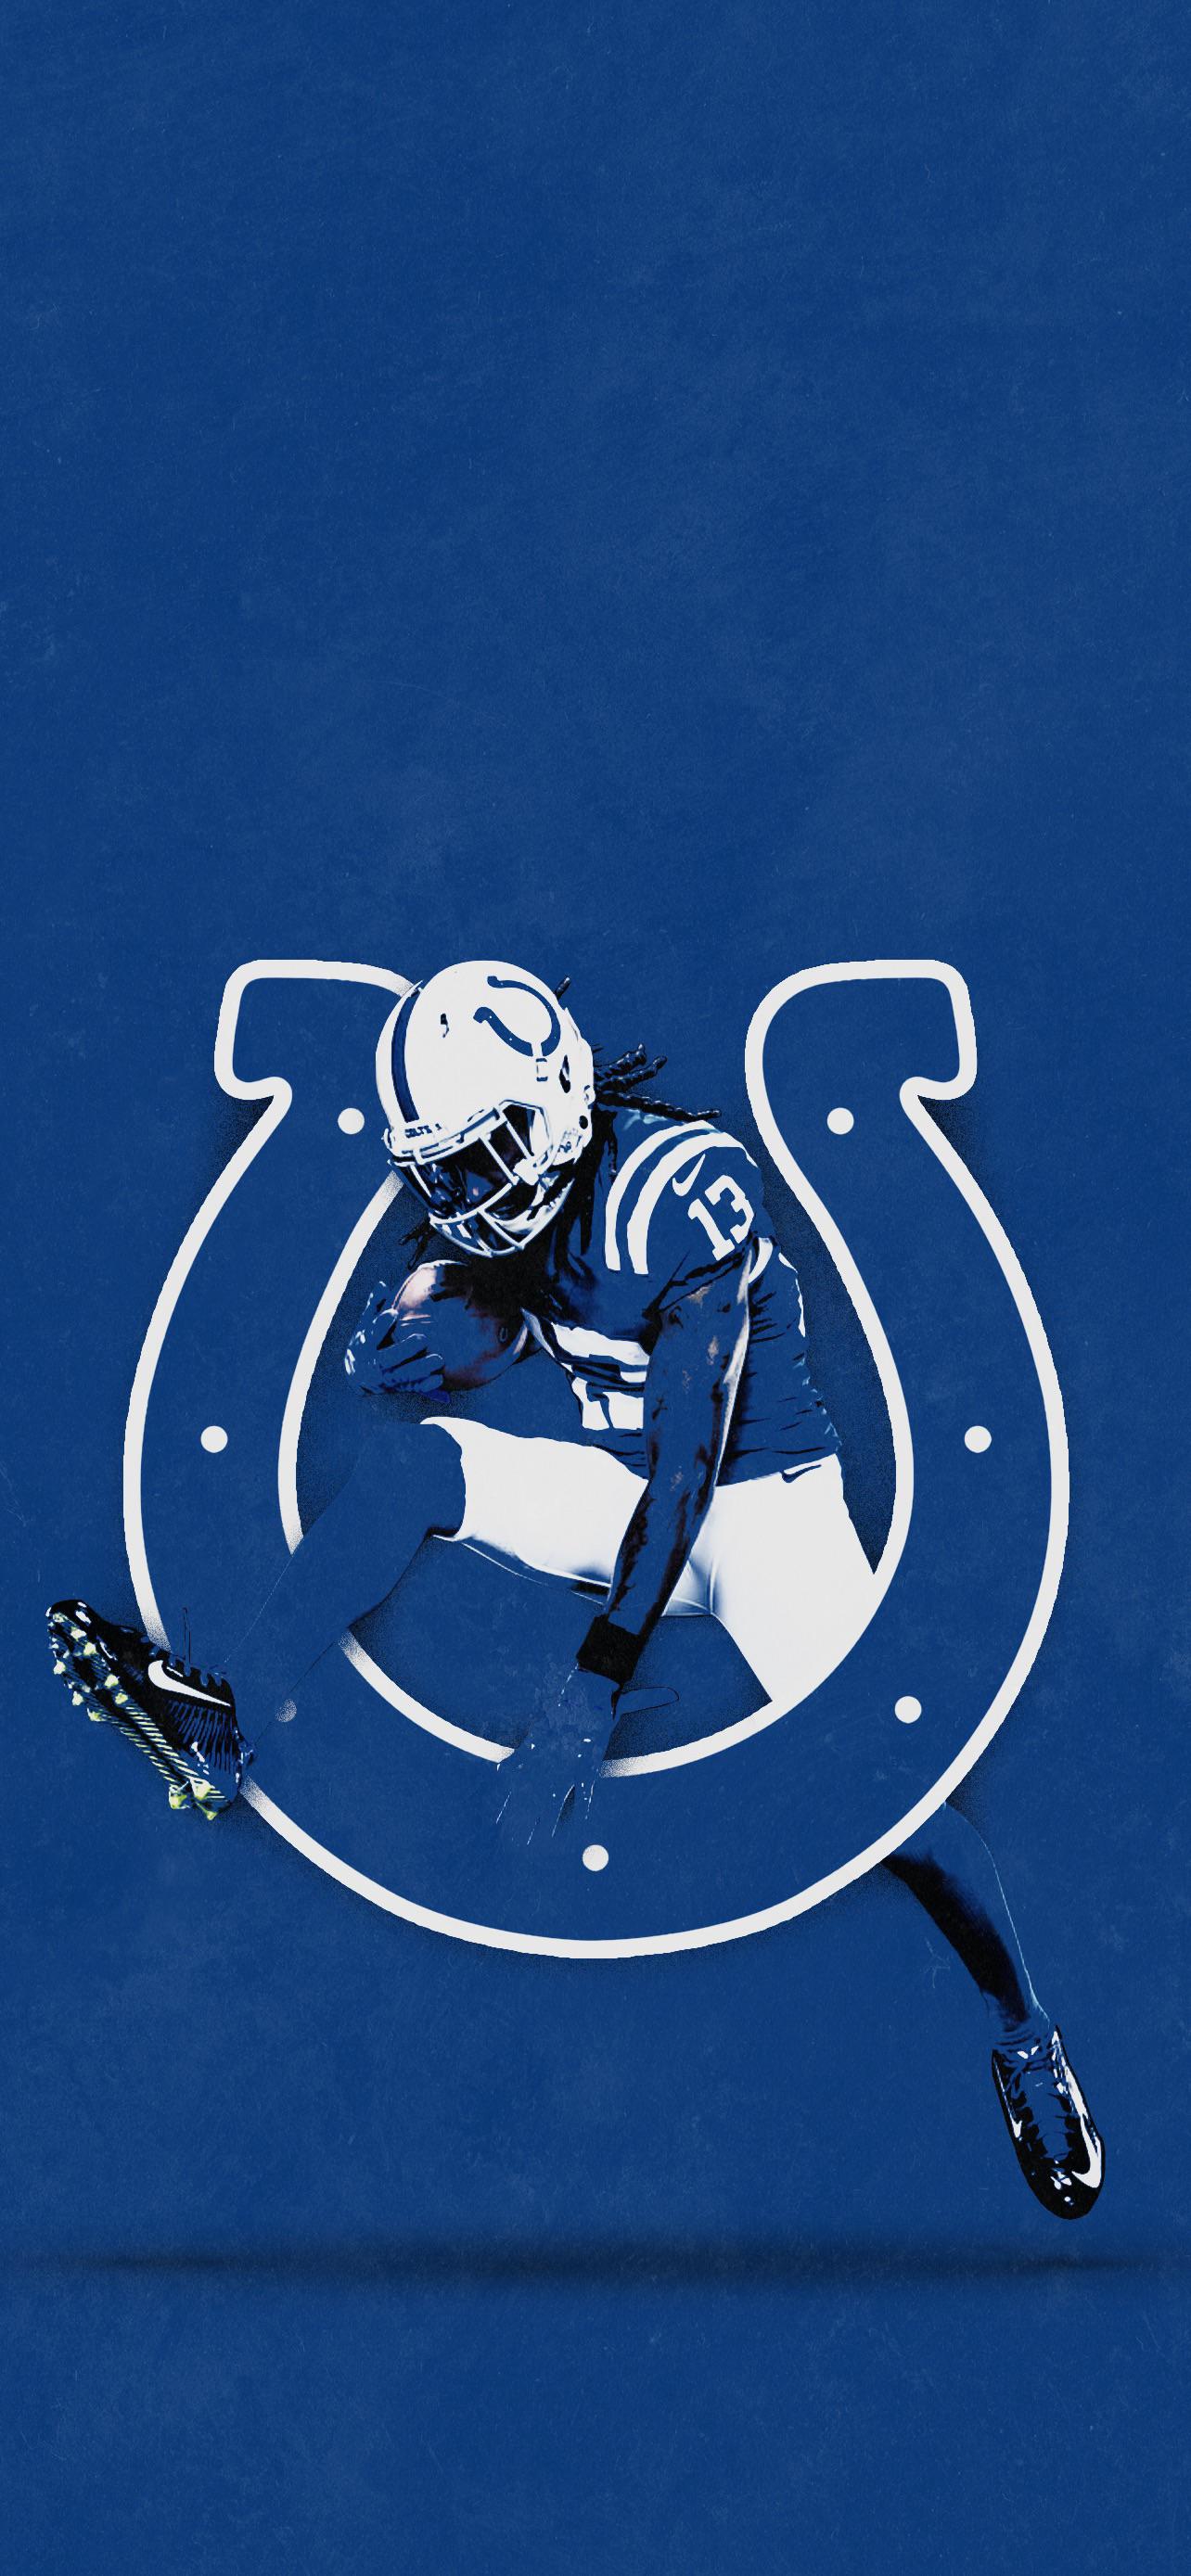 Wallpaper wednesday with the uncertainty of his future with the organization i felt ty deserved this weeks wallpaperðµð rcolts